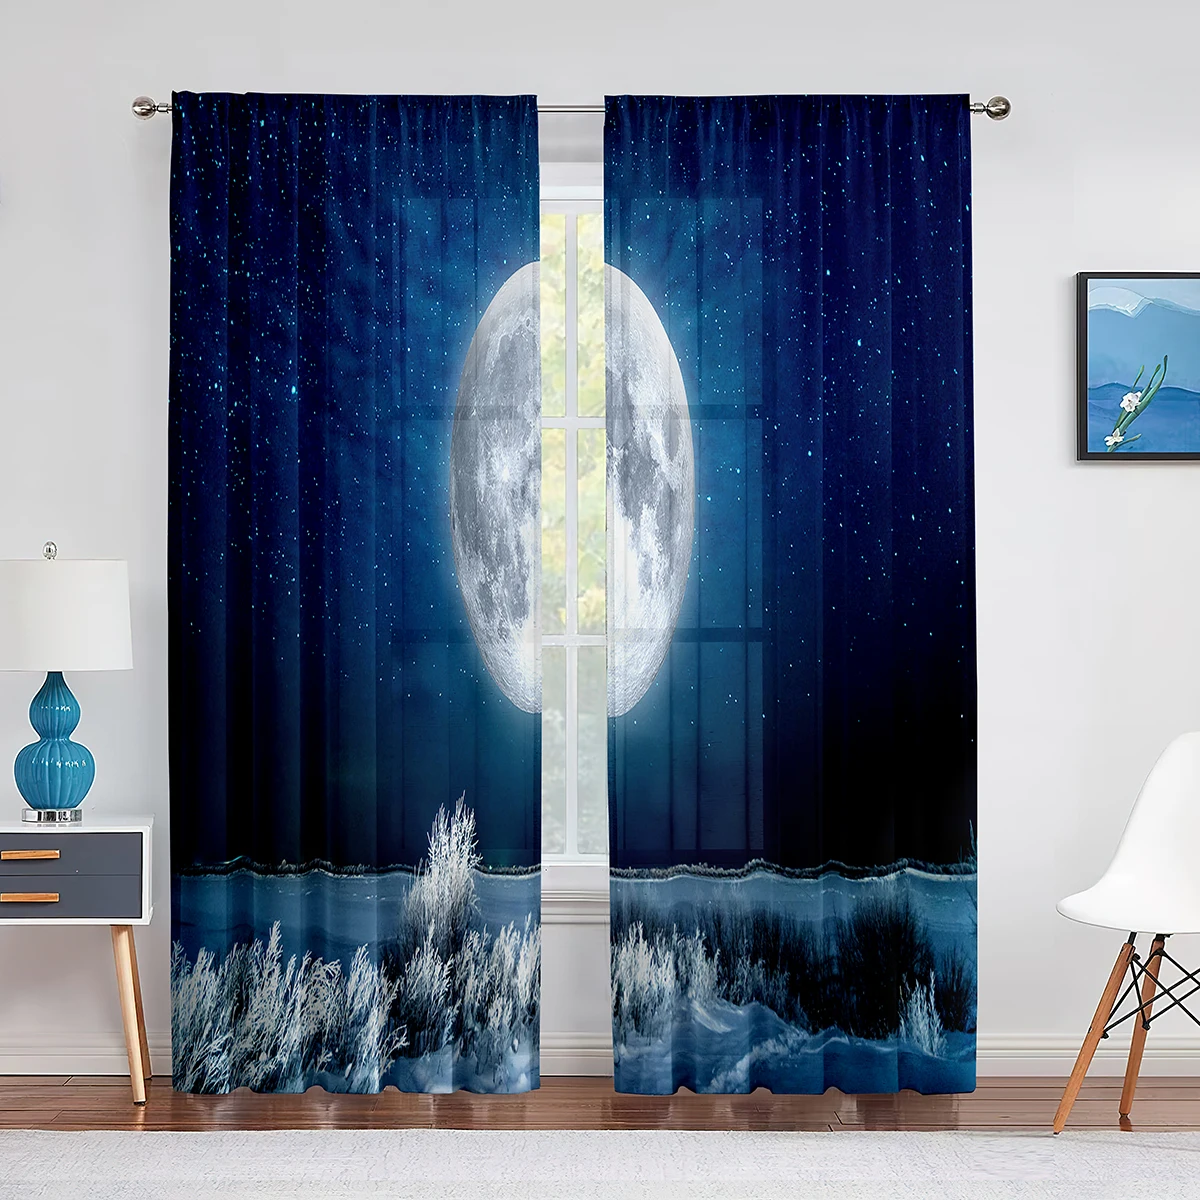 

Full Moon Fantasy Starry Sky Night Scene Tulle Curtains for Living Room Bedroom Kitchen Decor Sheer Voile Curtain Organza Drapes